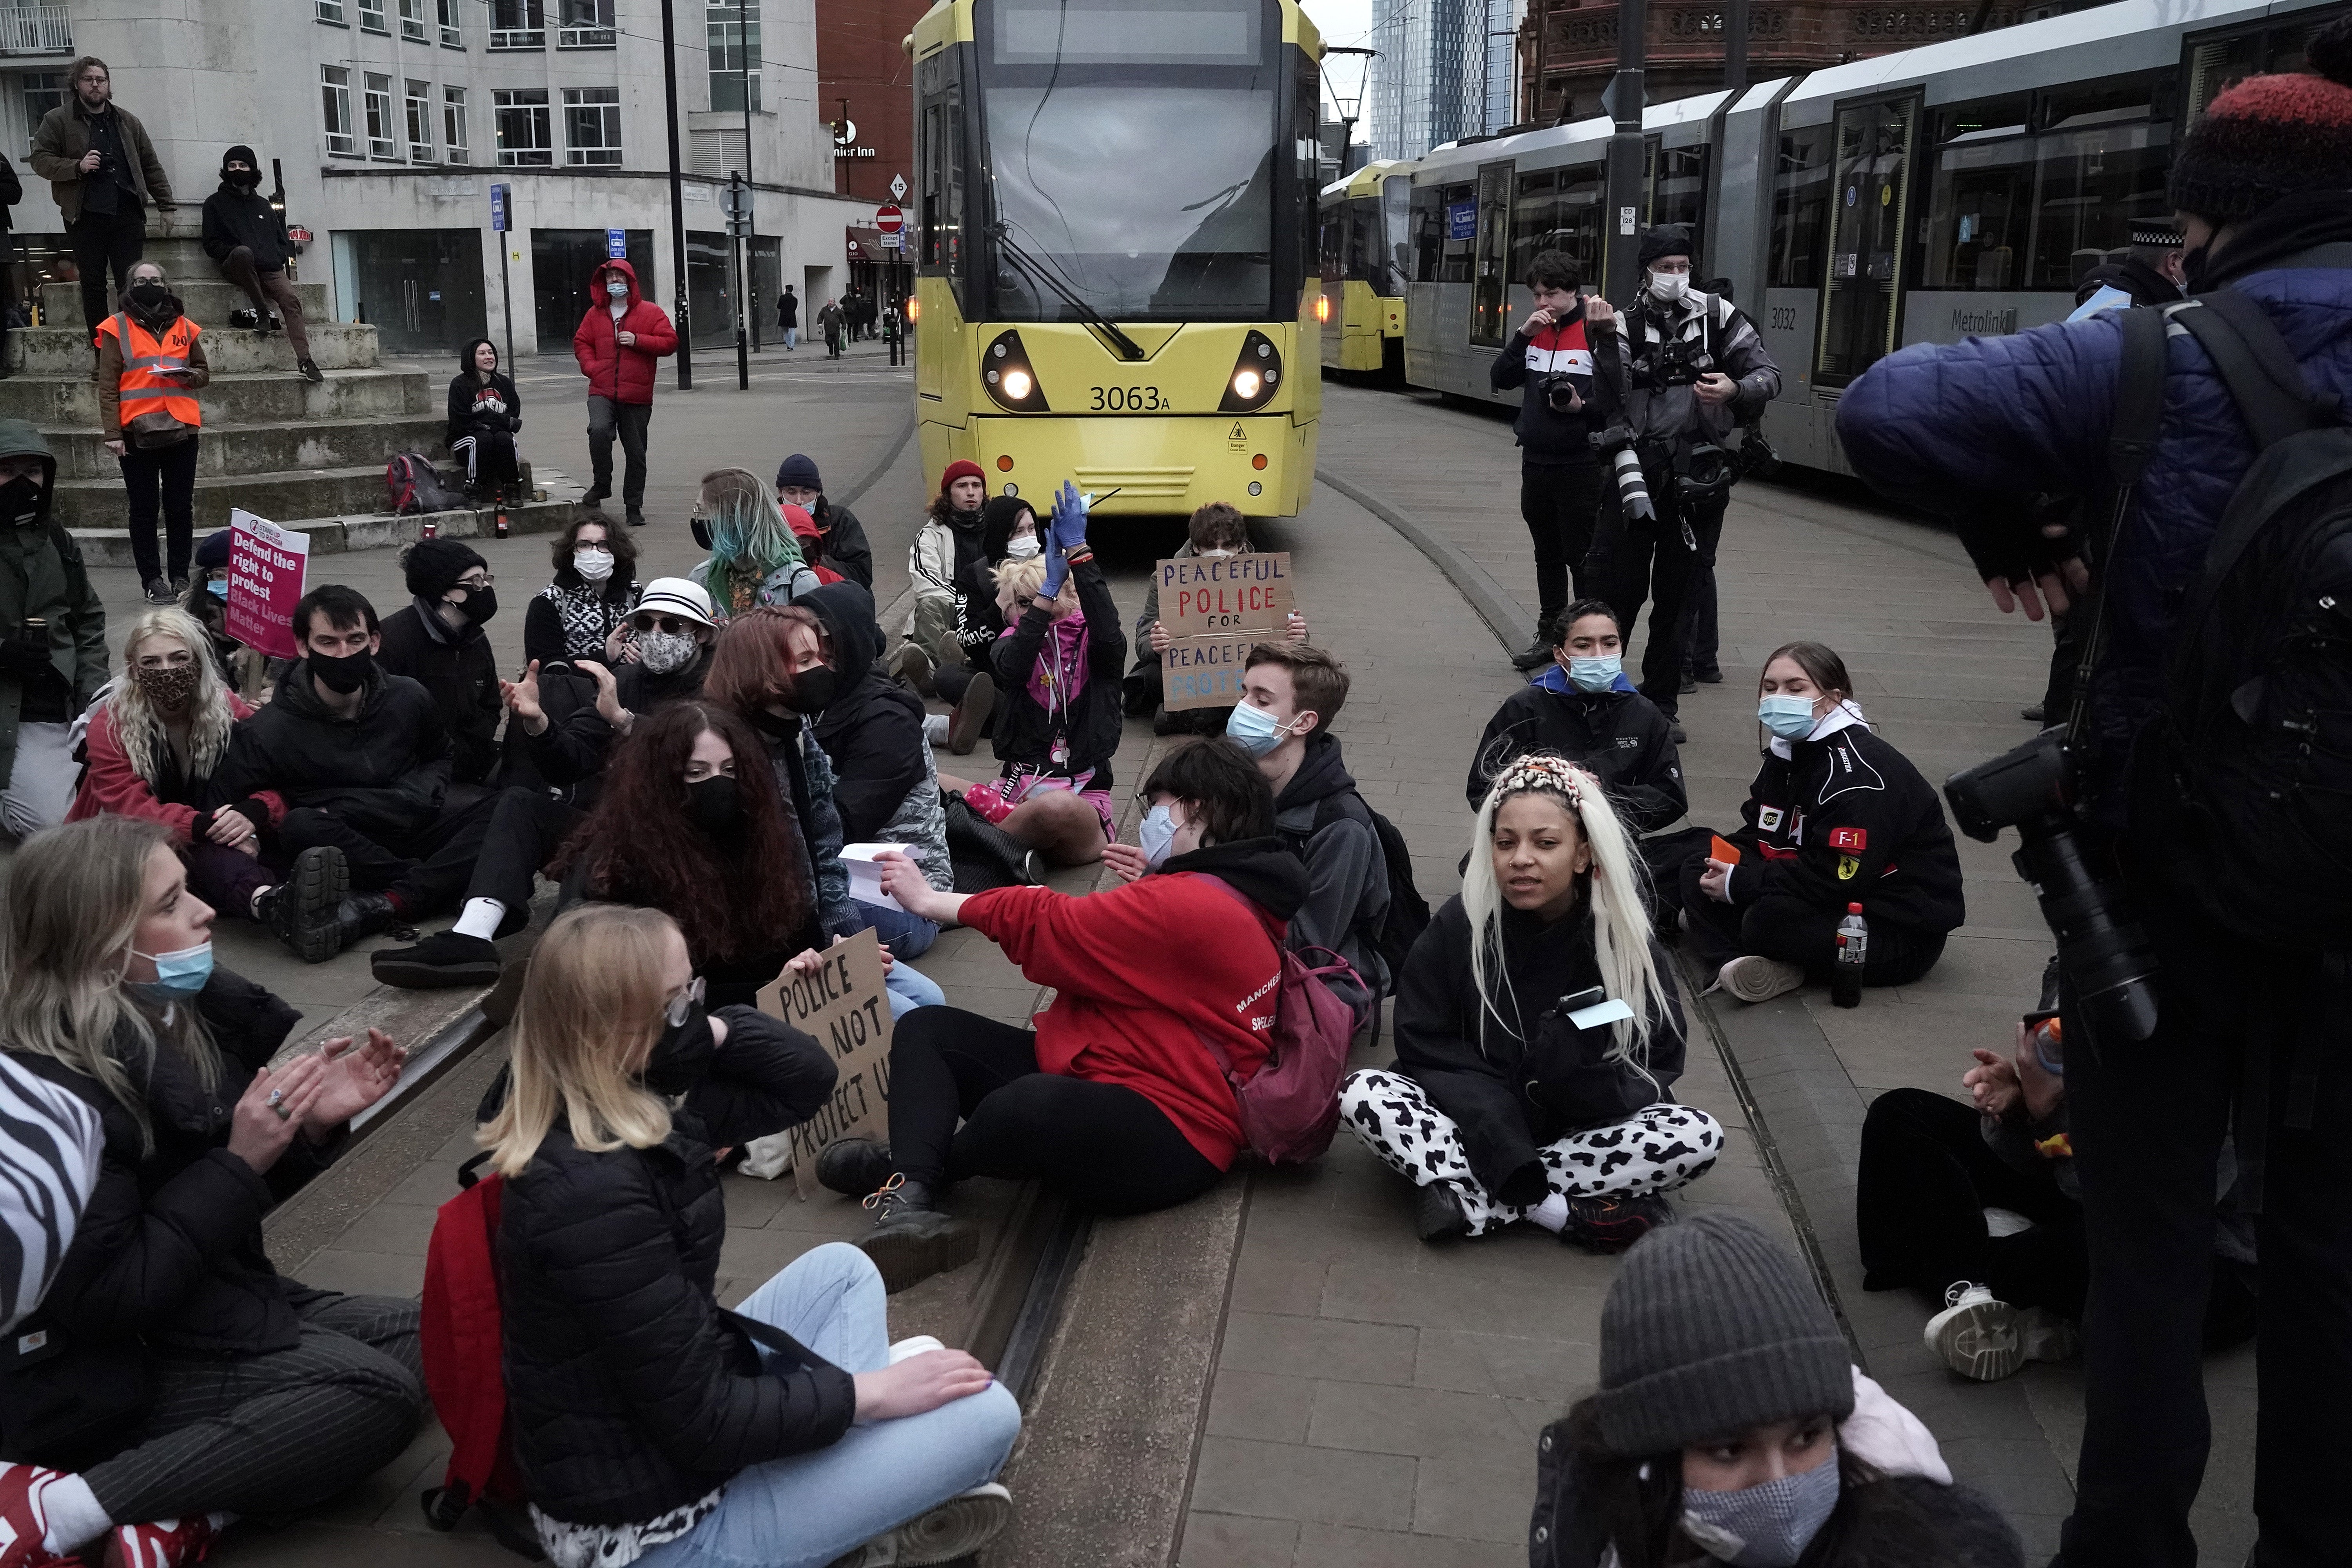 Demonstrators block the tram tracks during a ‘Kill the Bill’ protest in Manchester City Centre on 27 March, 2021